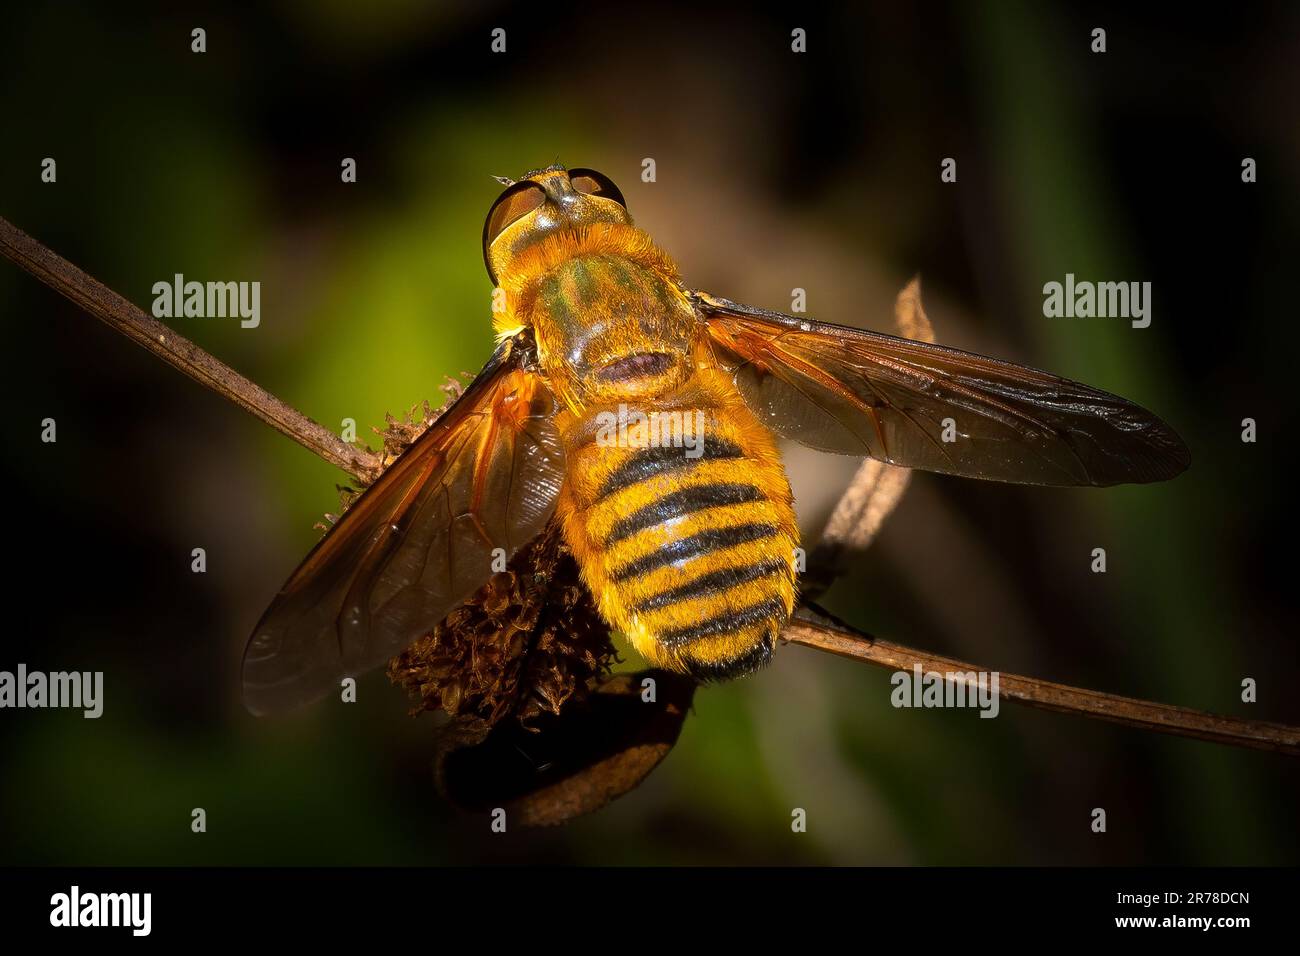 A drone fly gets ready to take flight in the Florida Everglades. This fly is actually a honey bee mimic and is often mistaken for one. Stock Photo